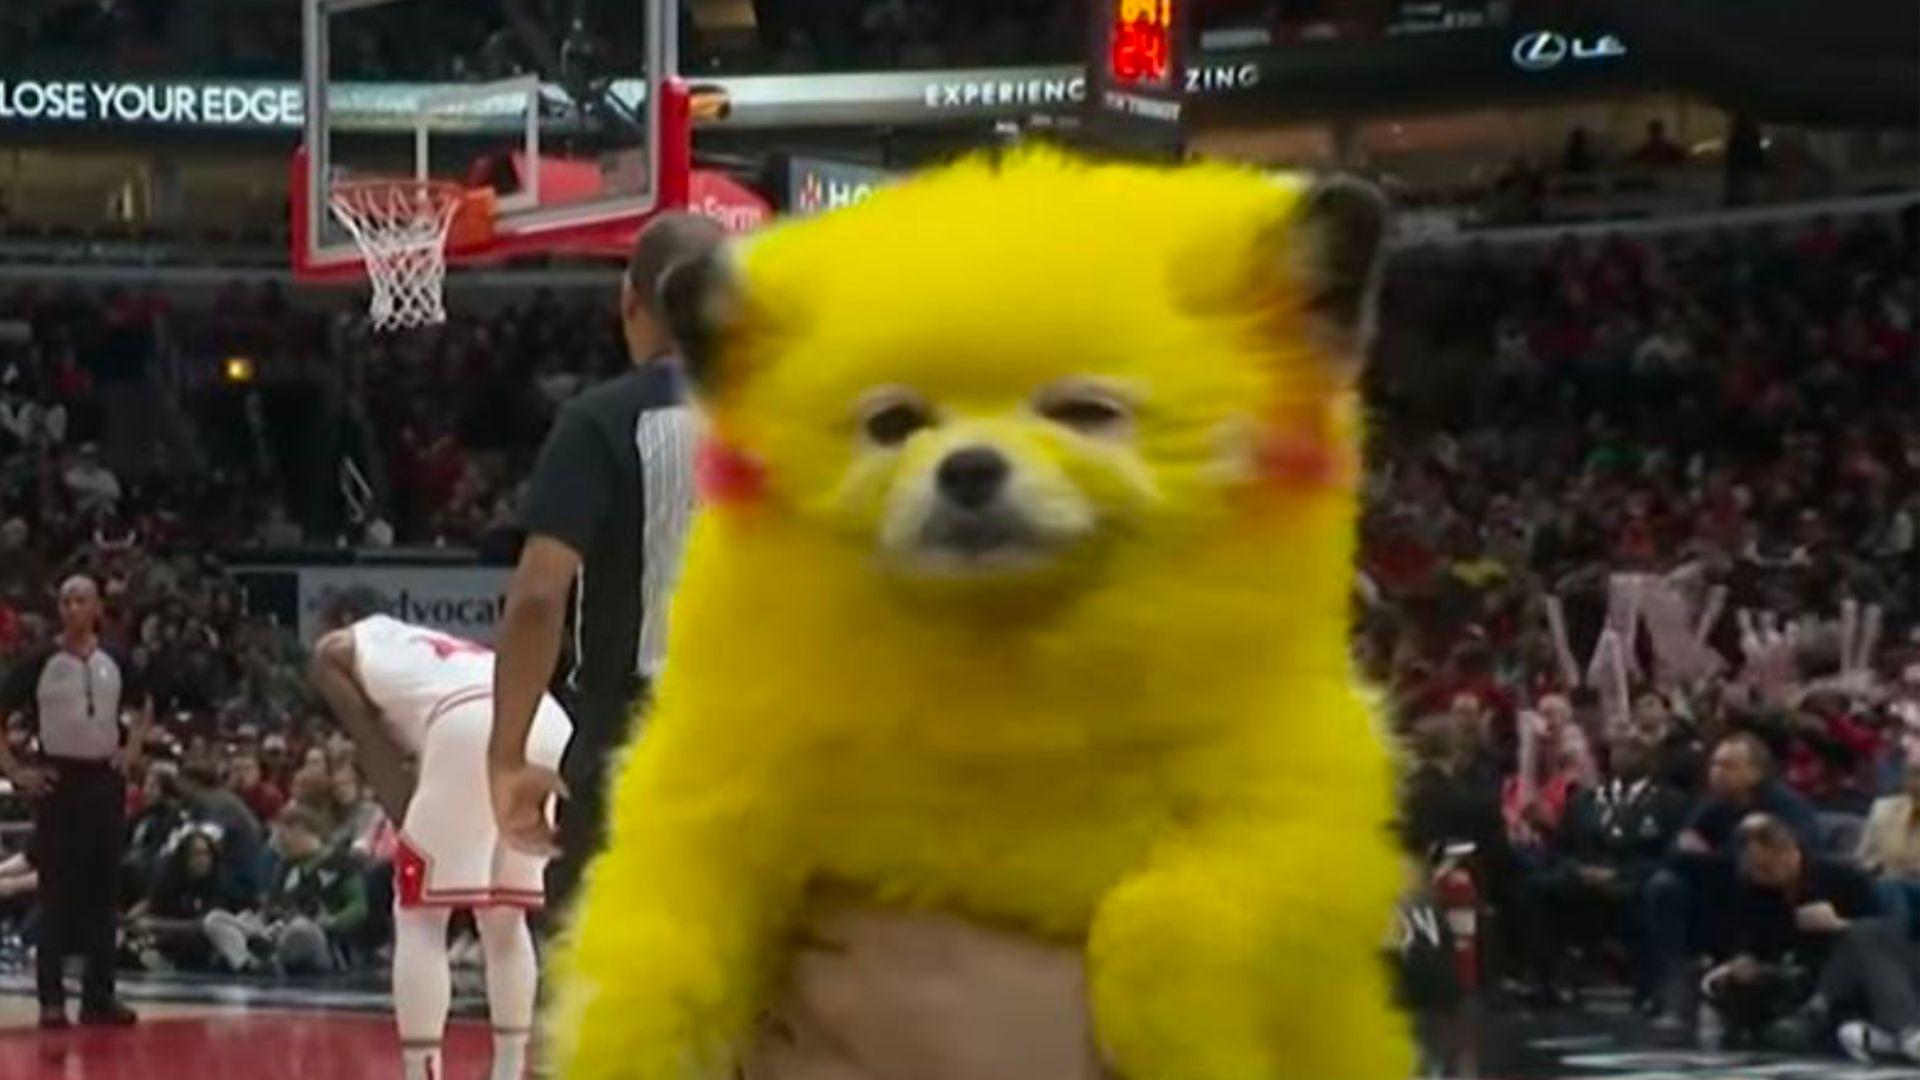 Dog dyed yellow like Pikachu being held aloft at NBA game